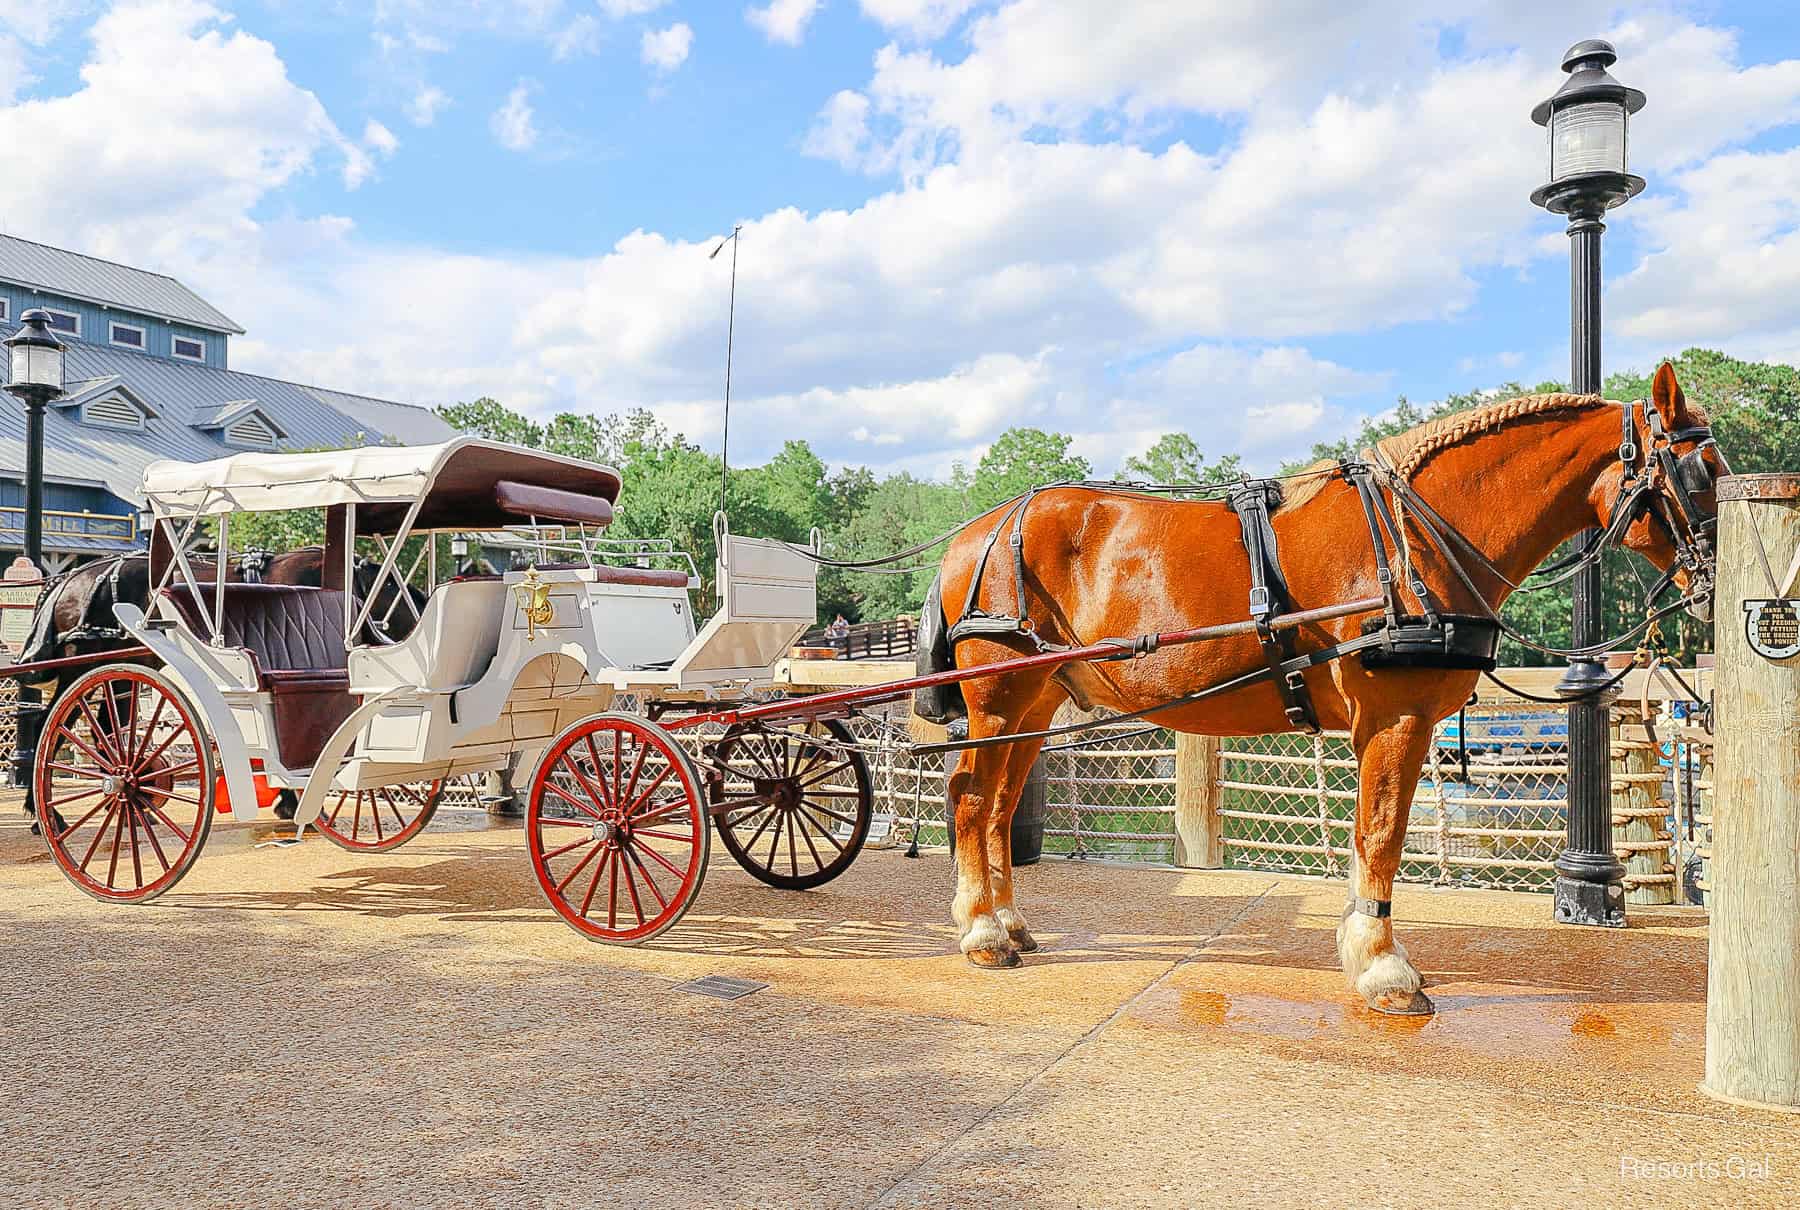 How to Book a Horse-Drawn Carriage Ride at Disney’s Port Orleans Riverside